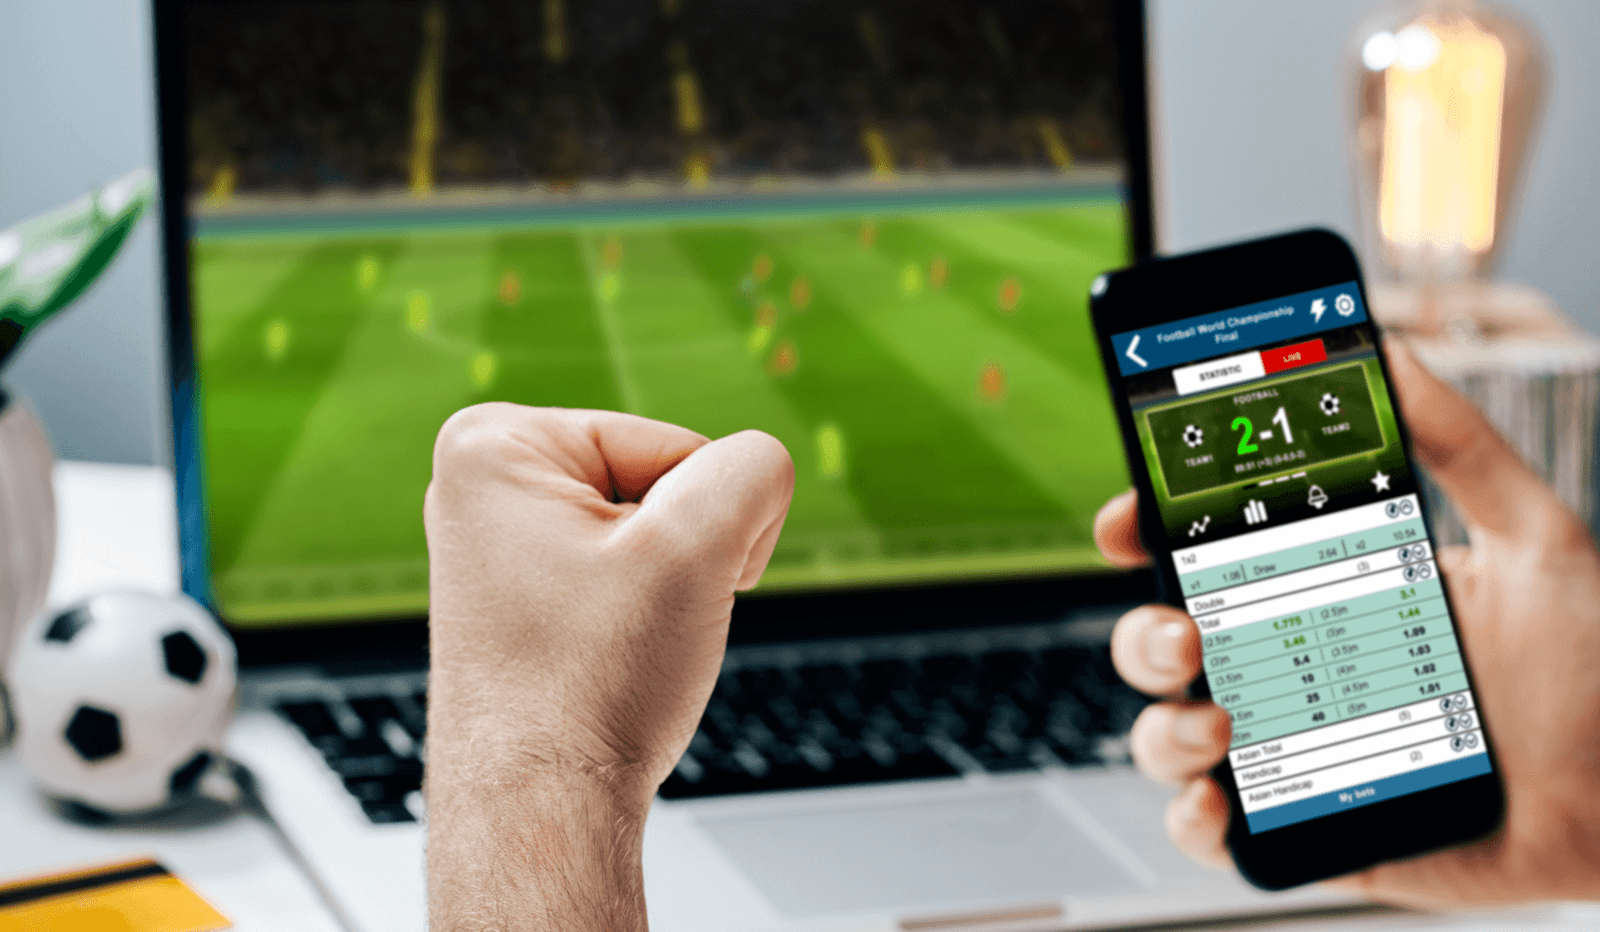 Benefits of a sports management software